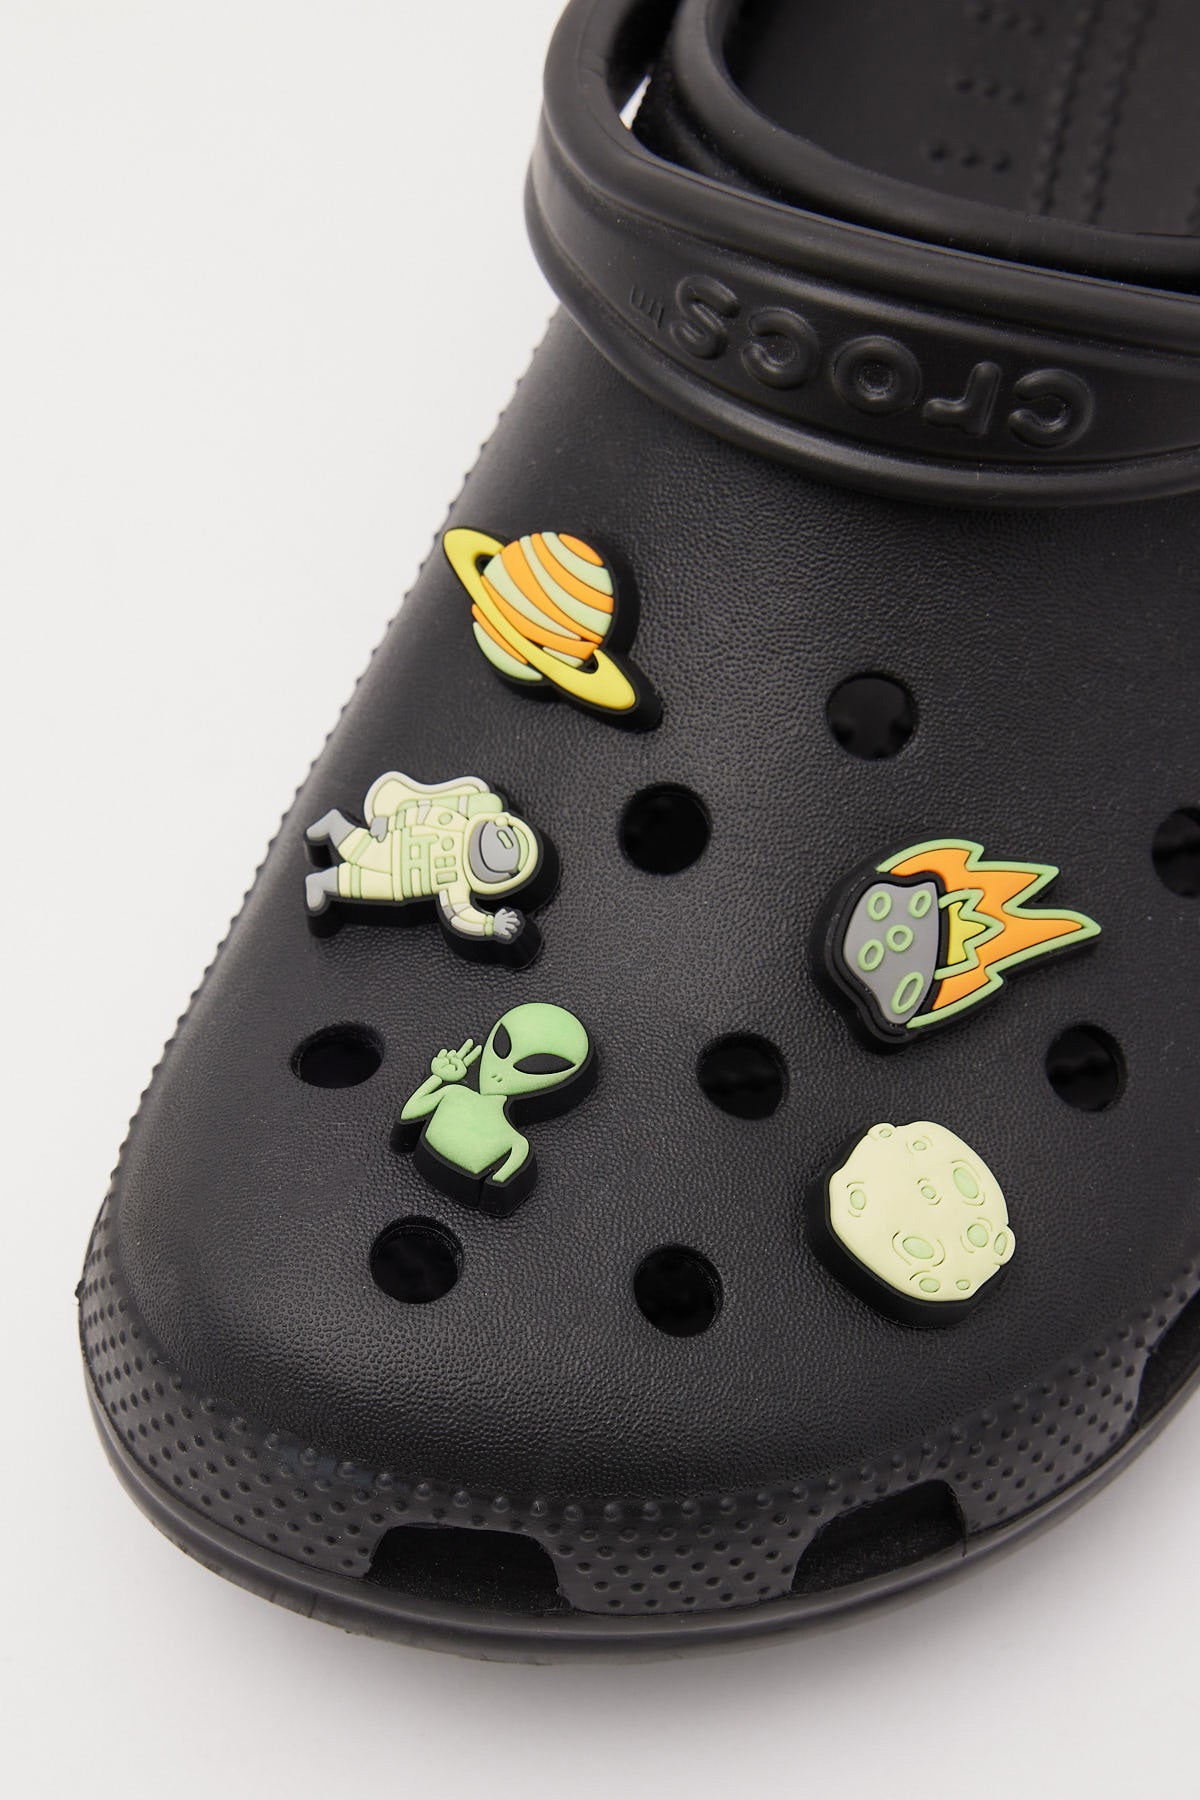 Crocs Charms for sale in Casuarina, Northern Territory